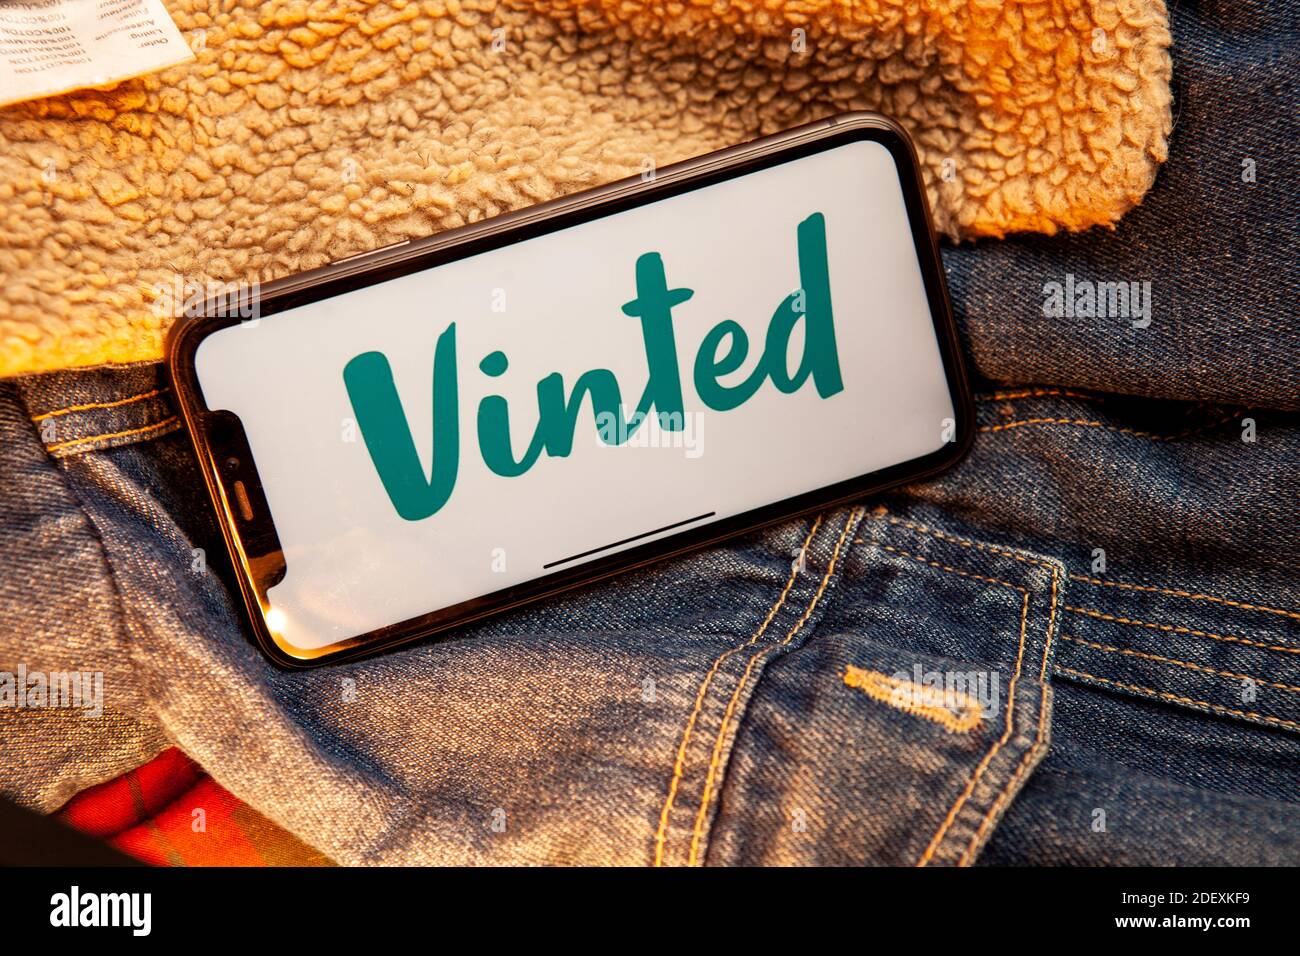 Vinted Iphone screen with vinted logo on screen with hand on vintage wooden  background. Vinted is a Lithuanian online marketplace. #Vinted Stock Photo  - Alamy